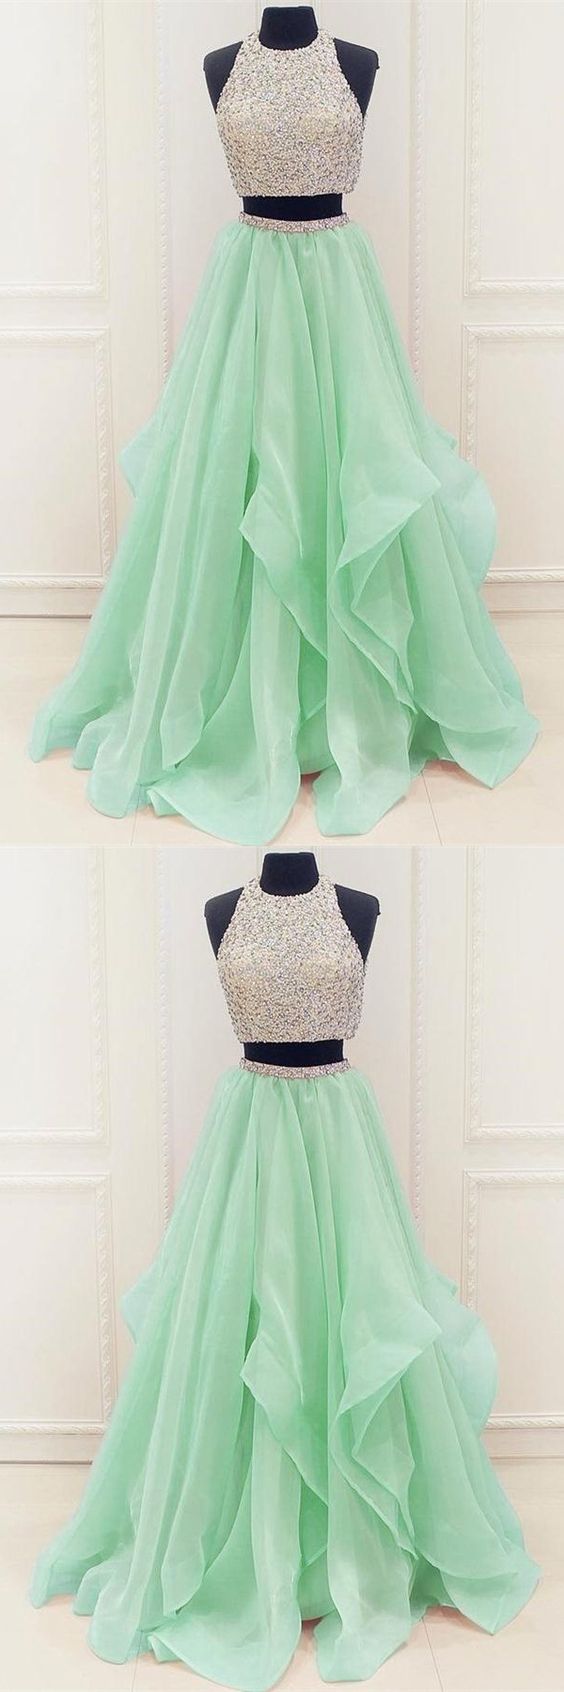 Mint Prom Dresses,two Pieces Prom Dresses,long Prom Dresses,prom Dress,prom Gowns M1776